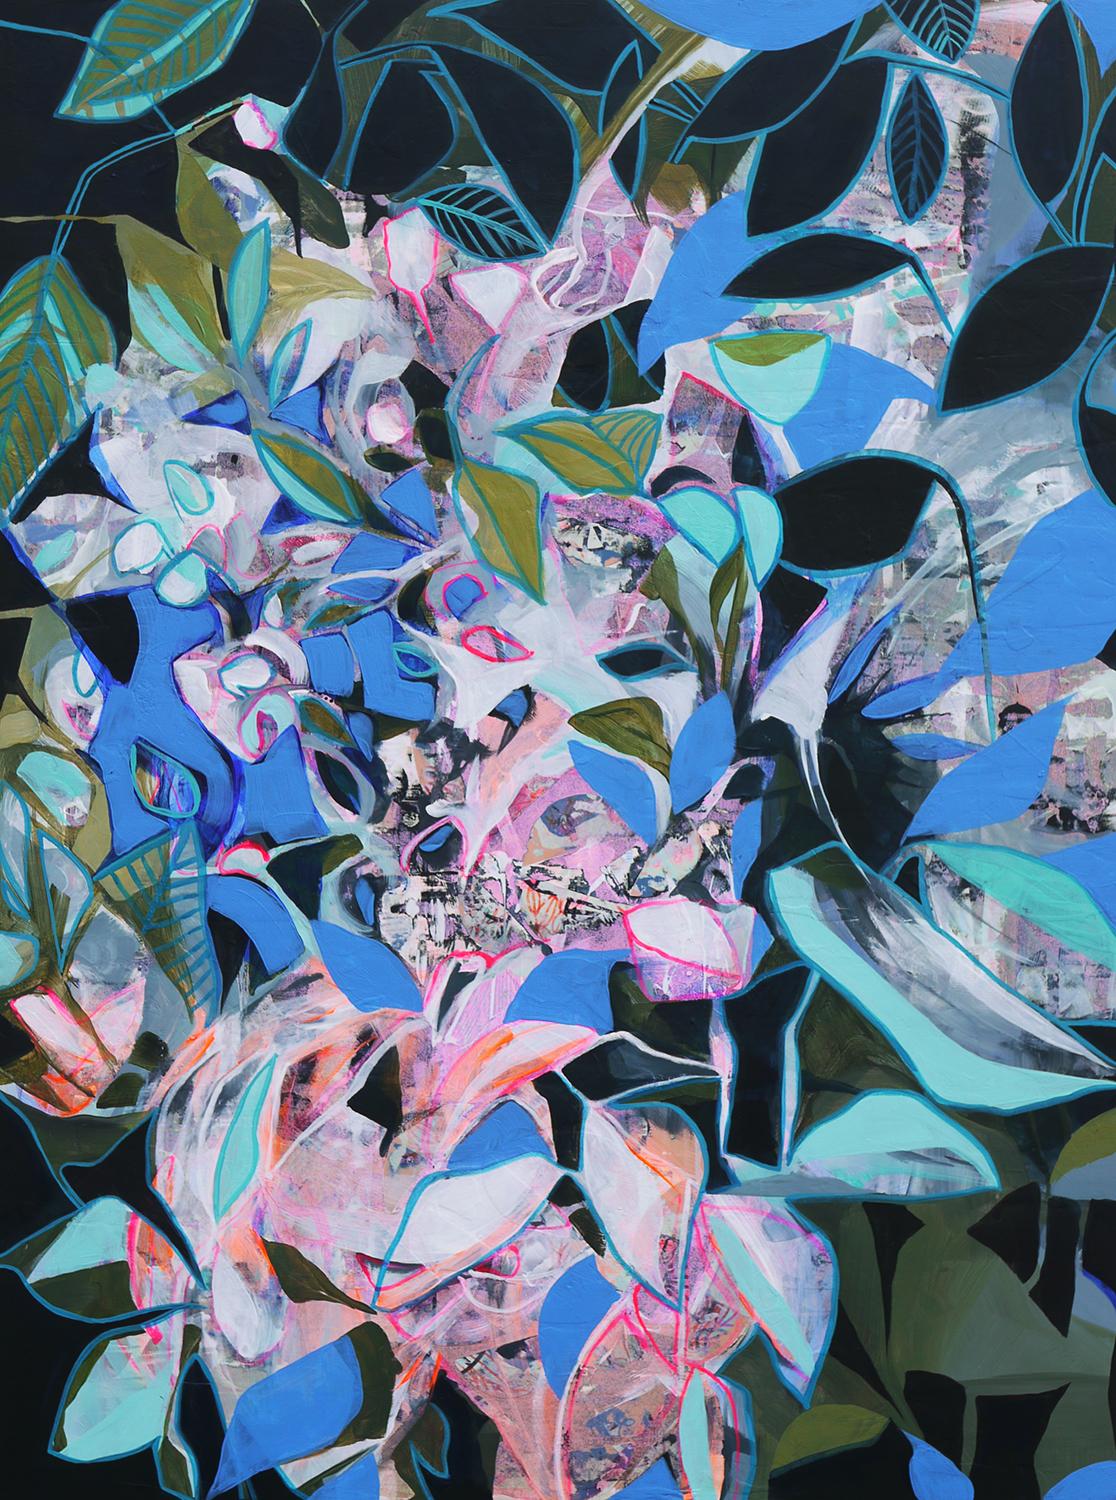 <p>Artist Comments<br>Abstract floral scene inspired by collage and paper cutout studies. "I look for ambiguous shapes and vibrations of color that I can bring to the surface," explains Manty. "My work is abstract and intuitive, but it is also